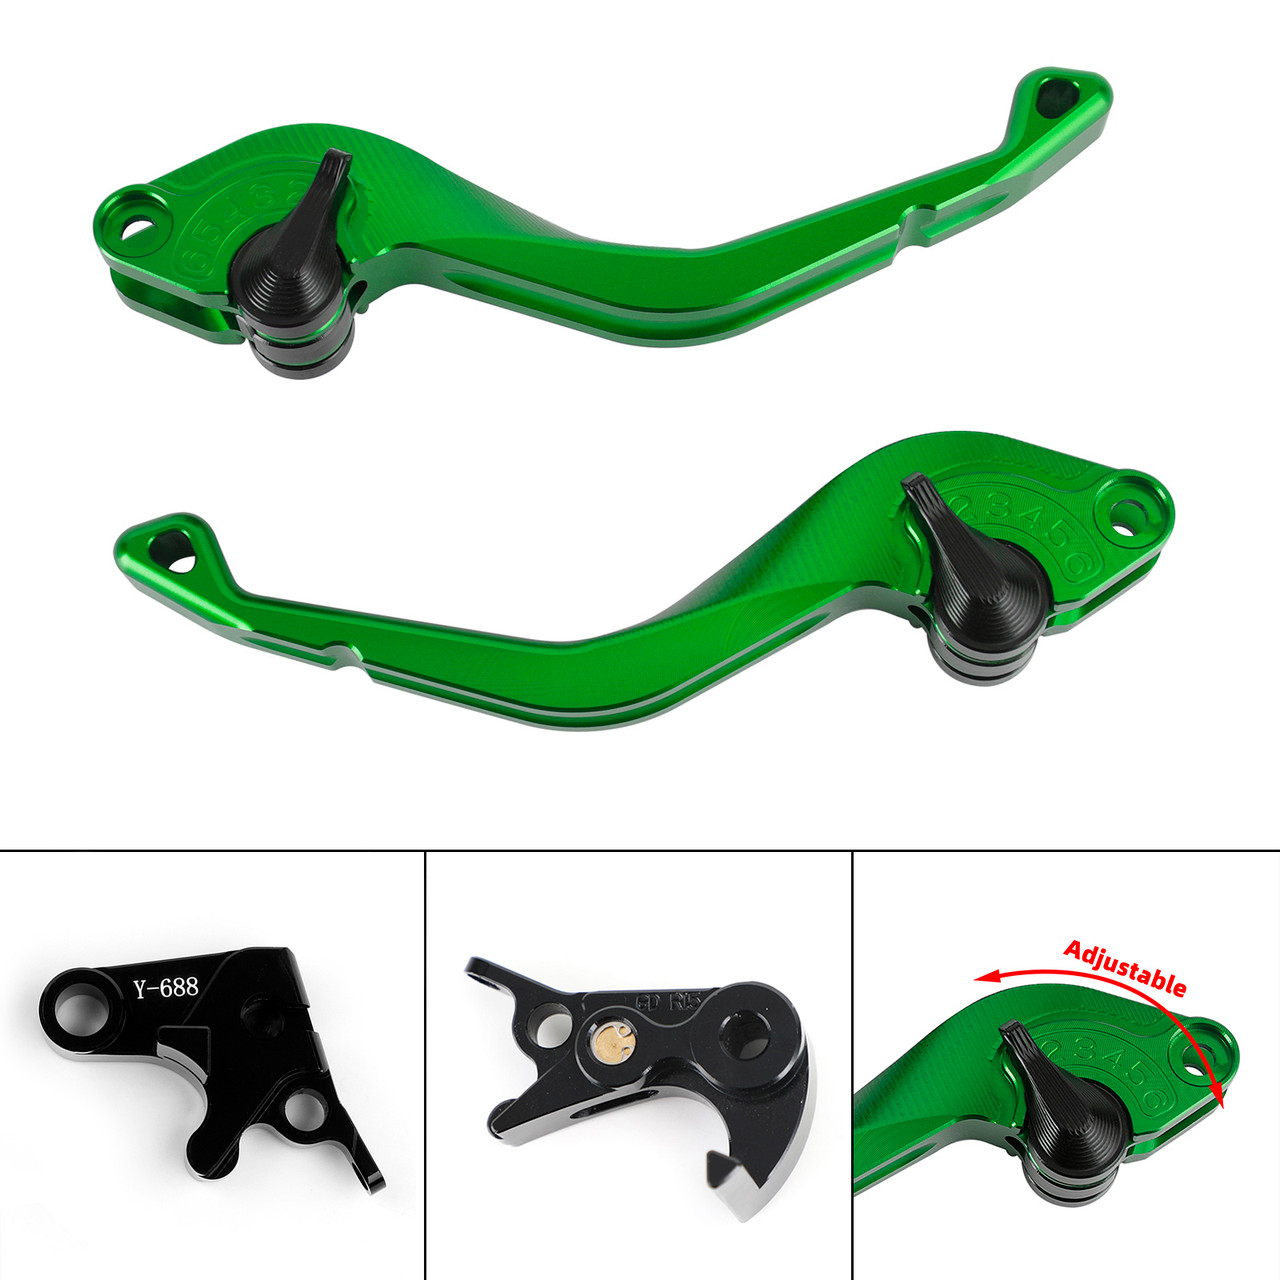 Short Clutch Brake Lever fit for Yamaha YZF R1 R1S R6 MT-09/SP Tracer